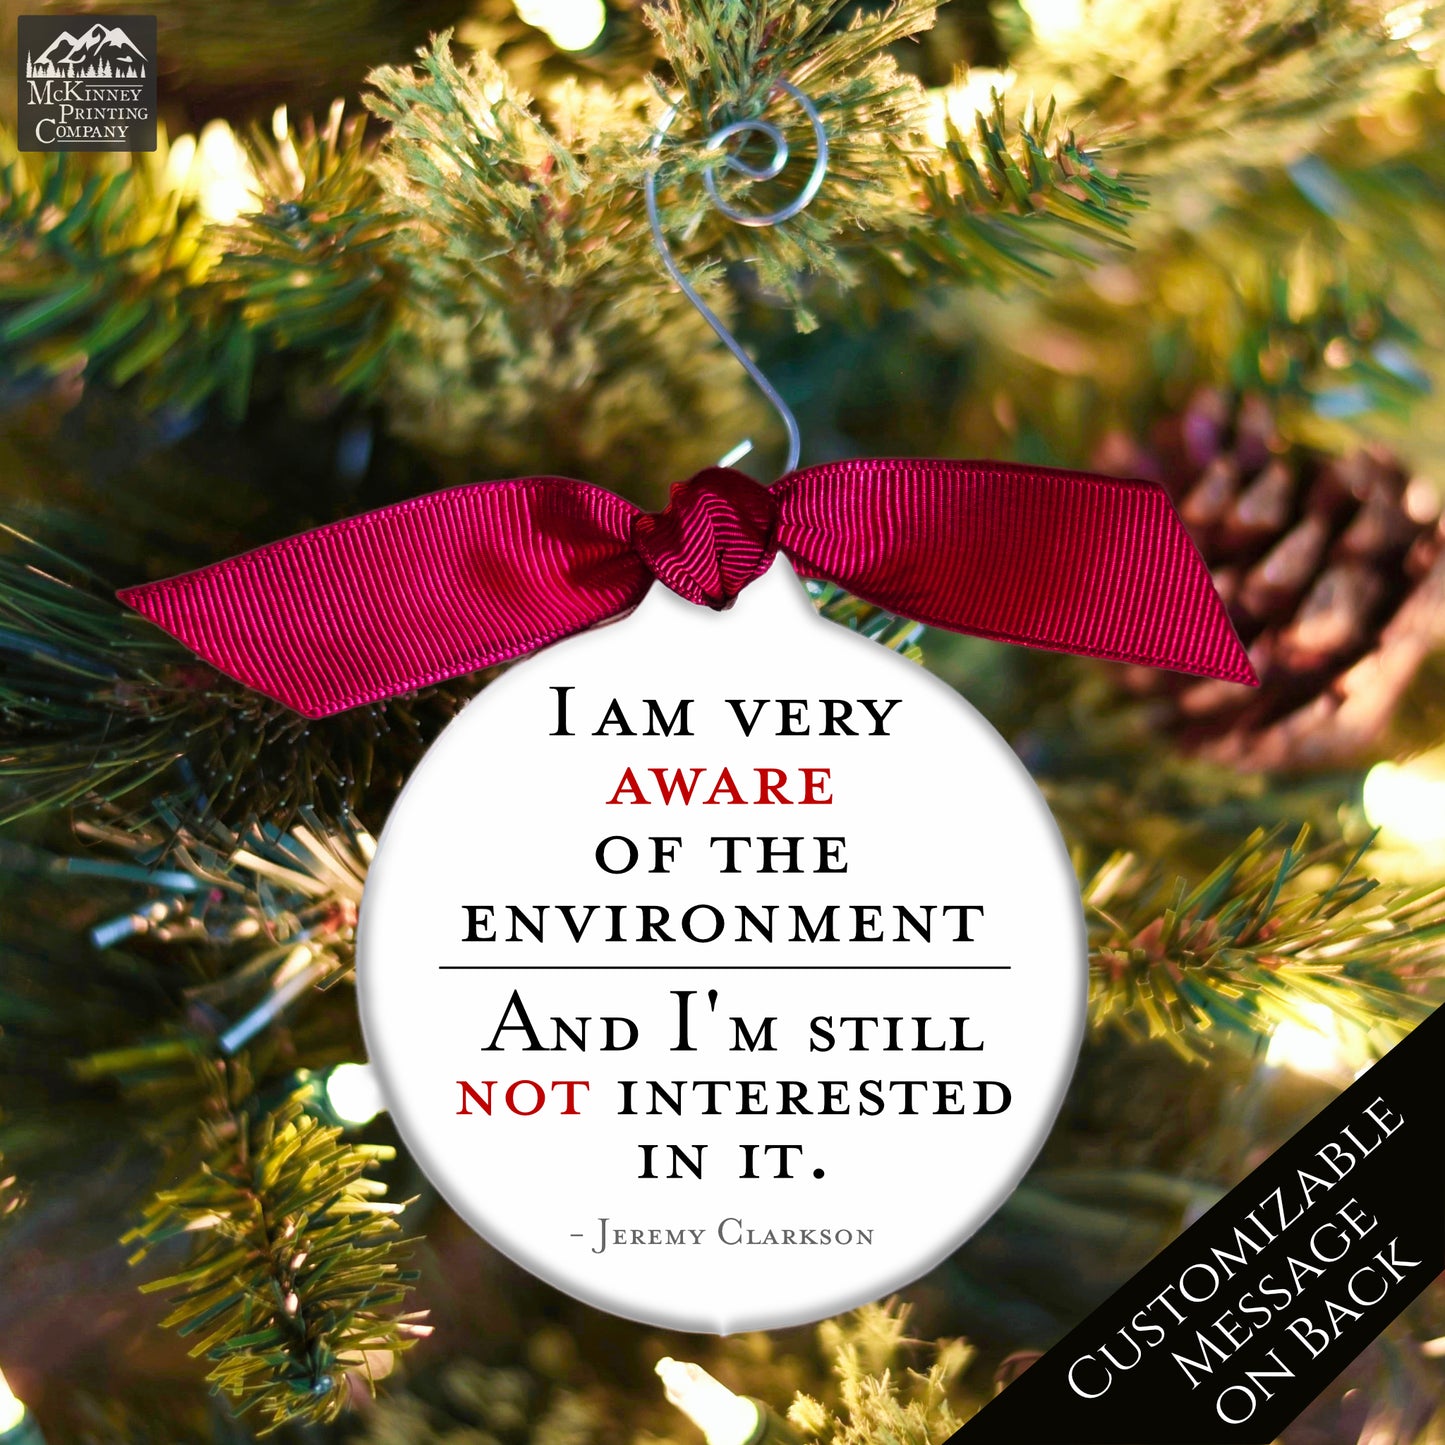 Top Gear - Christmas Ornament, Jeremy Clarkson, Quote, Car Gifts